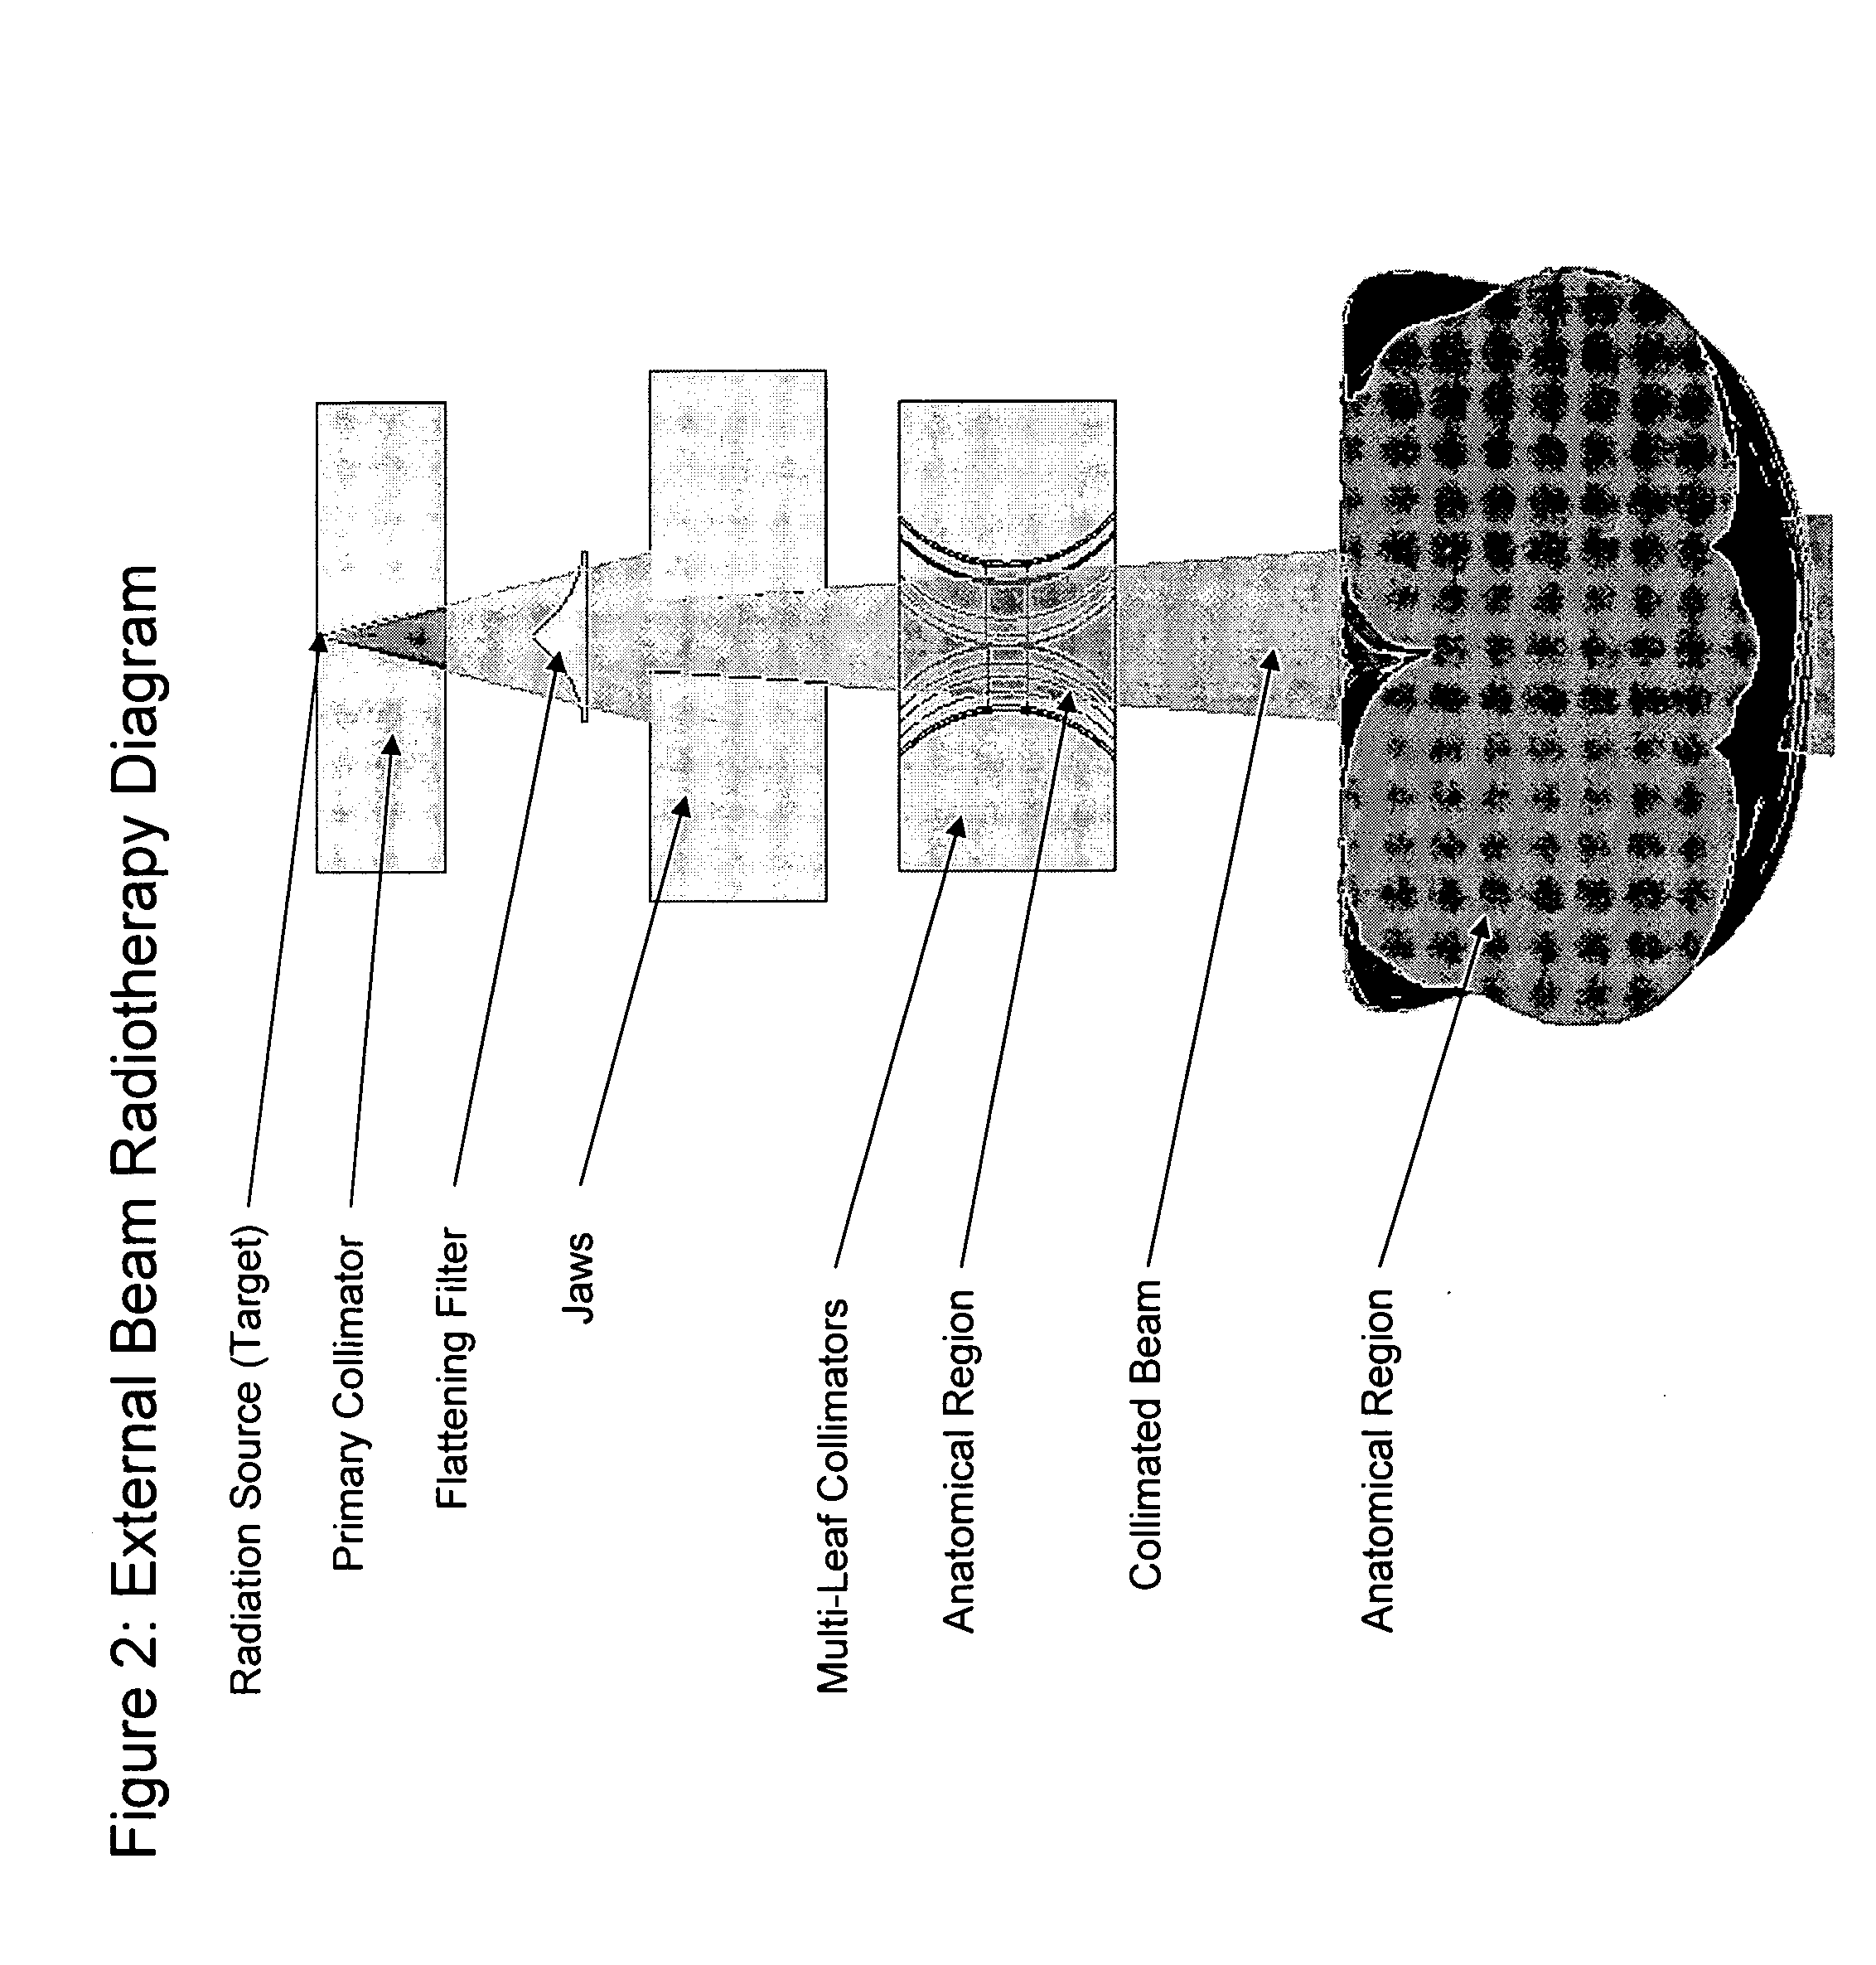 Deterministic computation of radiation transport for radiotherapy dose calculations and scatter correction for image reconstruction